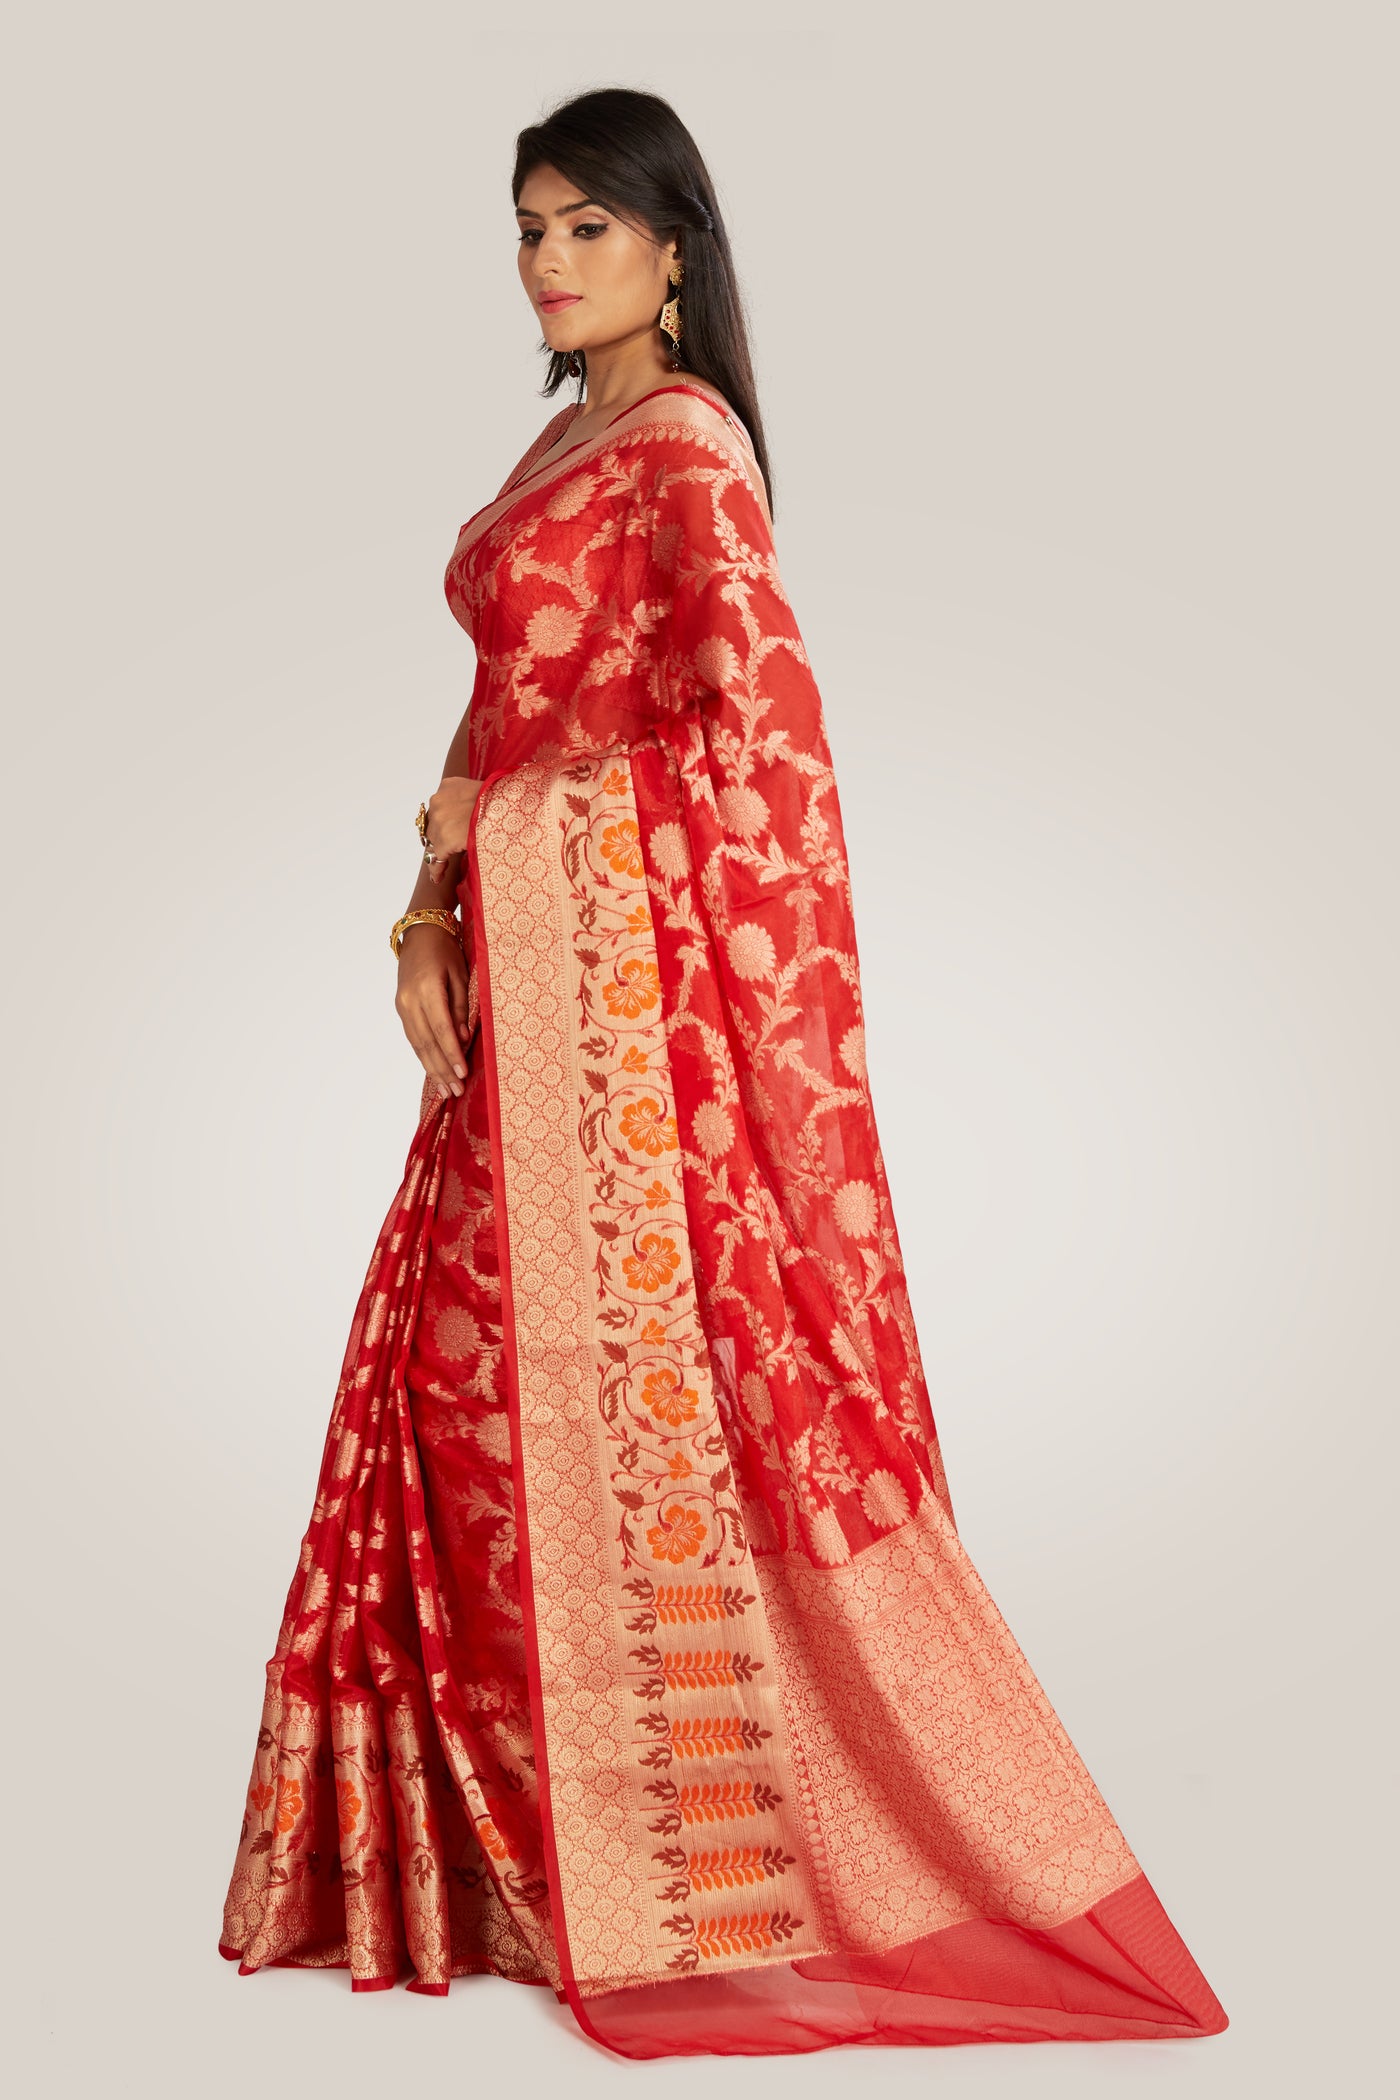 Banarsi Saree in Red with Gold - Indian Clothing in Denver, CO, Aurora, CO, Boulder, CO, Fort Collins, CO, Colorado Springs, CO, Parker, CO, Highlands Ranch, CO, Cherry Creek, CO, Centennial, CO, and Longmont, CO. Nationwide shipping USA - India Fashion X